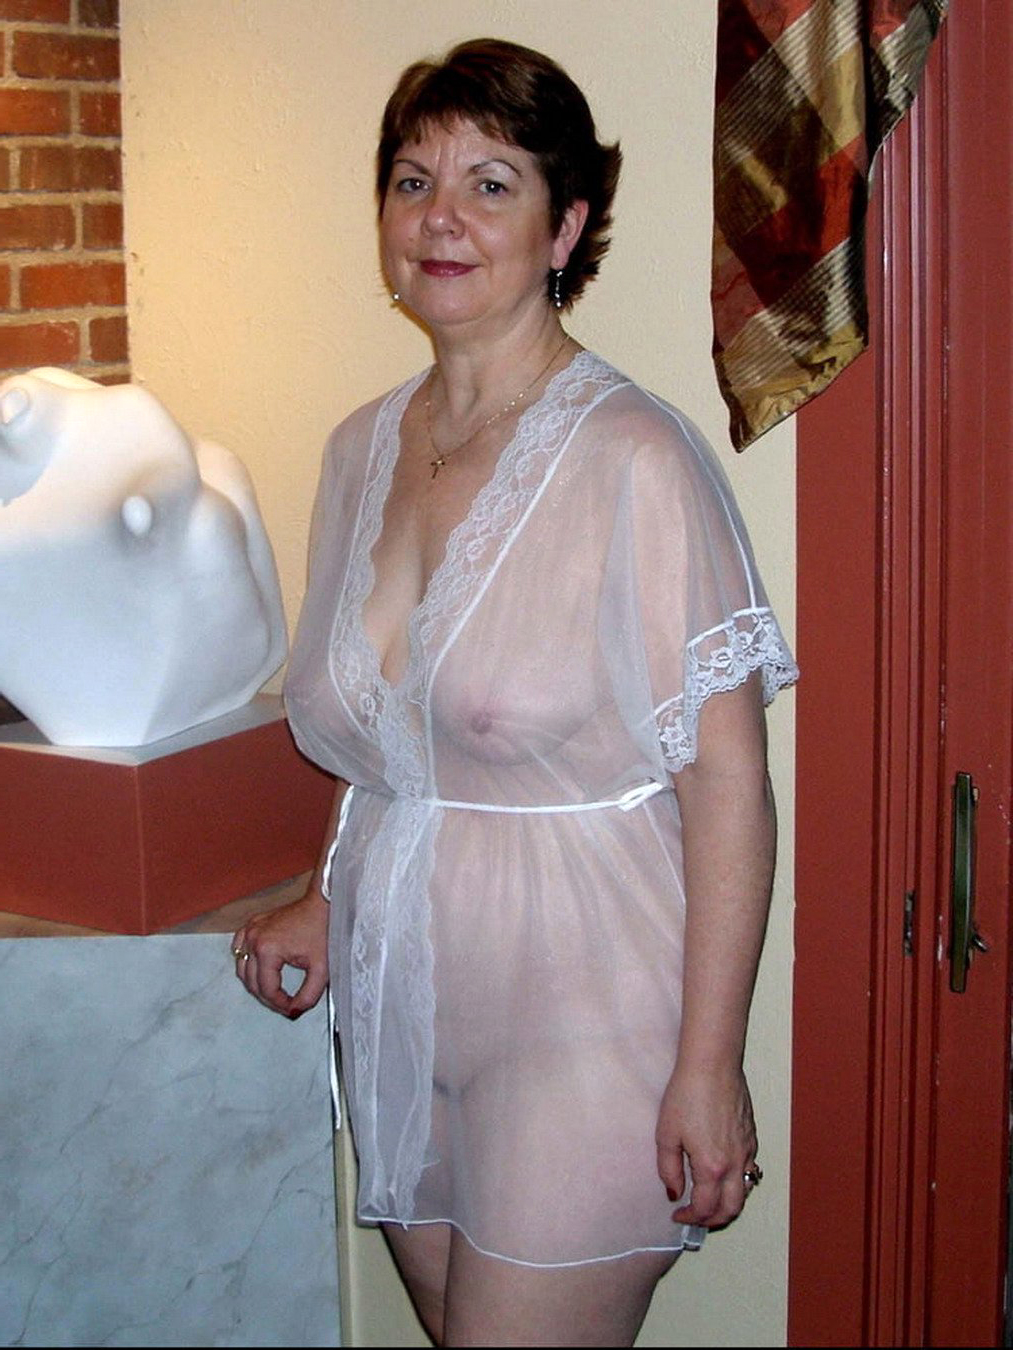 horny old women porn nude gallery pic